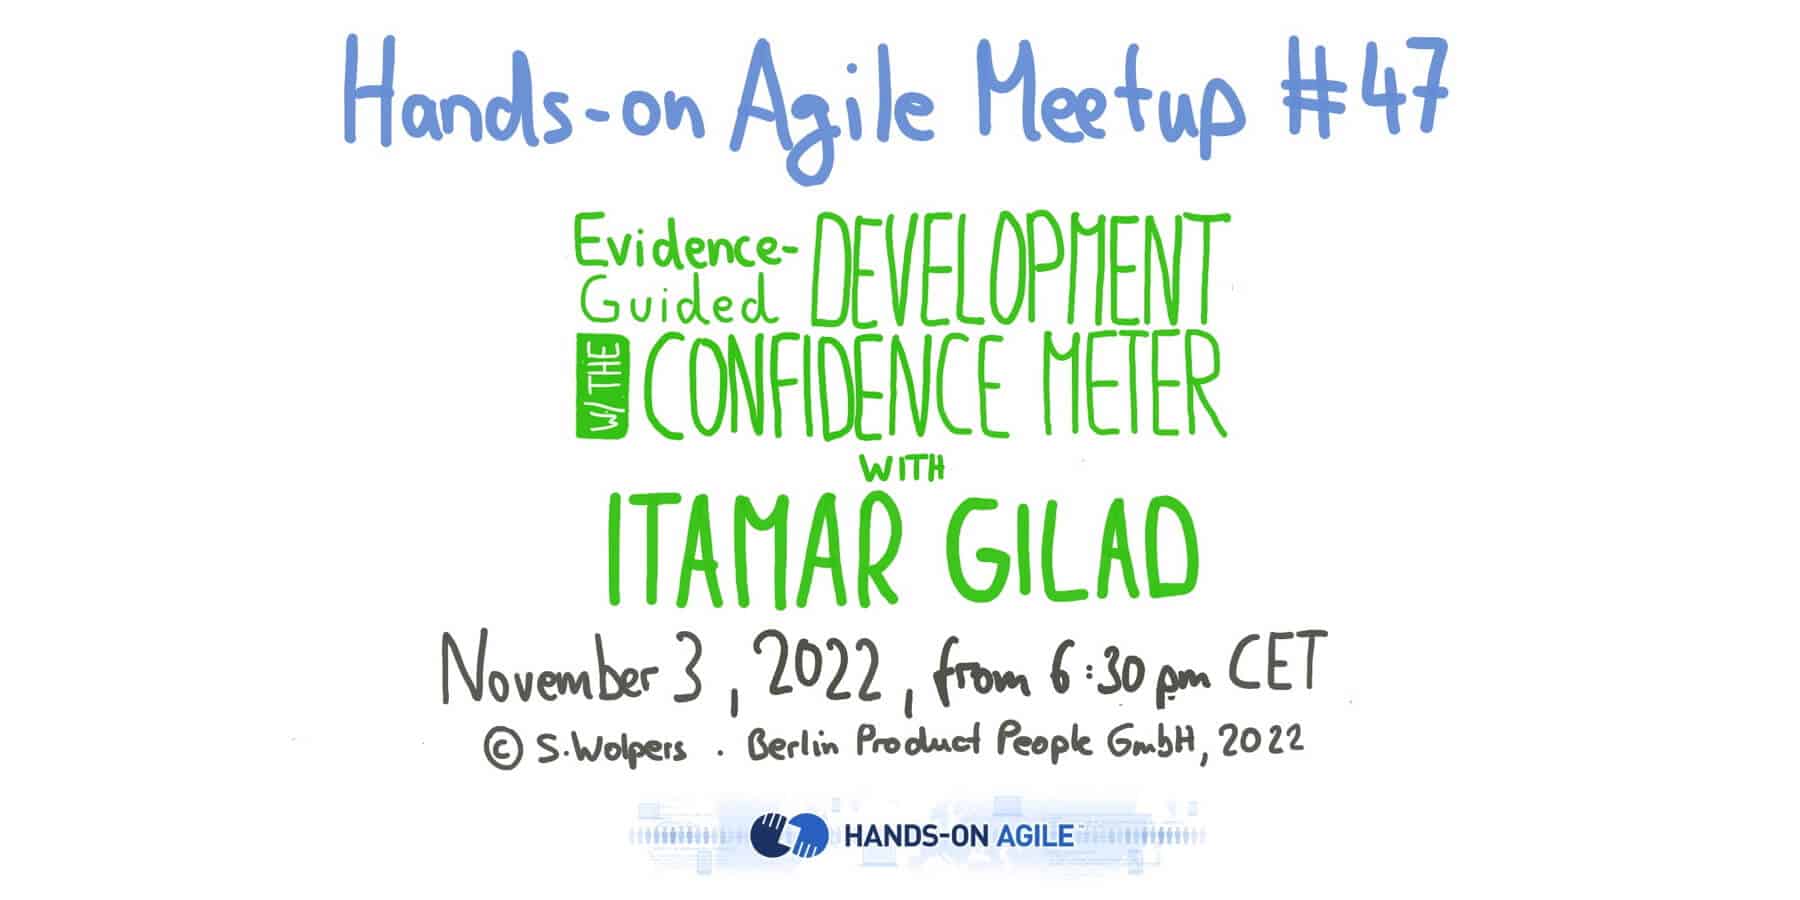 Hands-on Agile #47: Evidence-guided Development Using the Confidence Meter w/ Itamar Gilad — November 3, 2022 — Berlin-Product-People.com